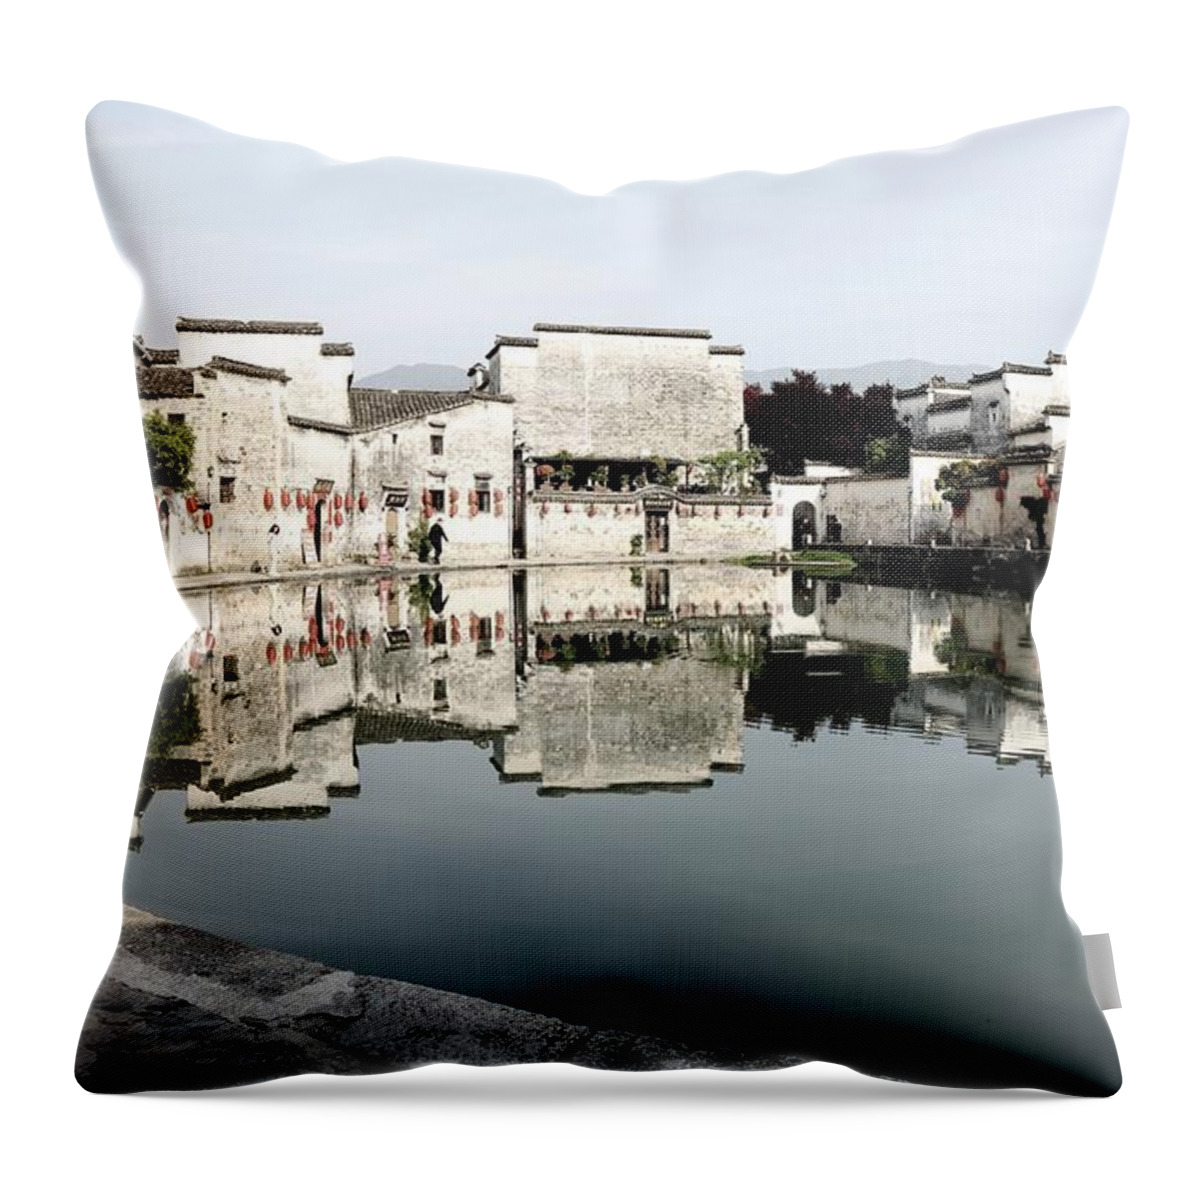 Moon Pond Throw Pillow featuring the photograph Moon Pond In Hong Village 4 by Mingming Jiang